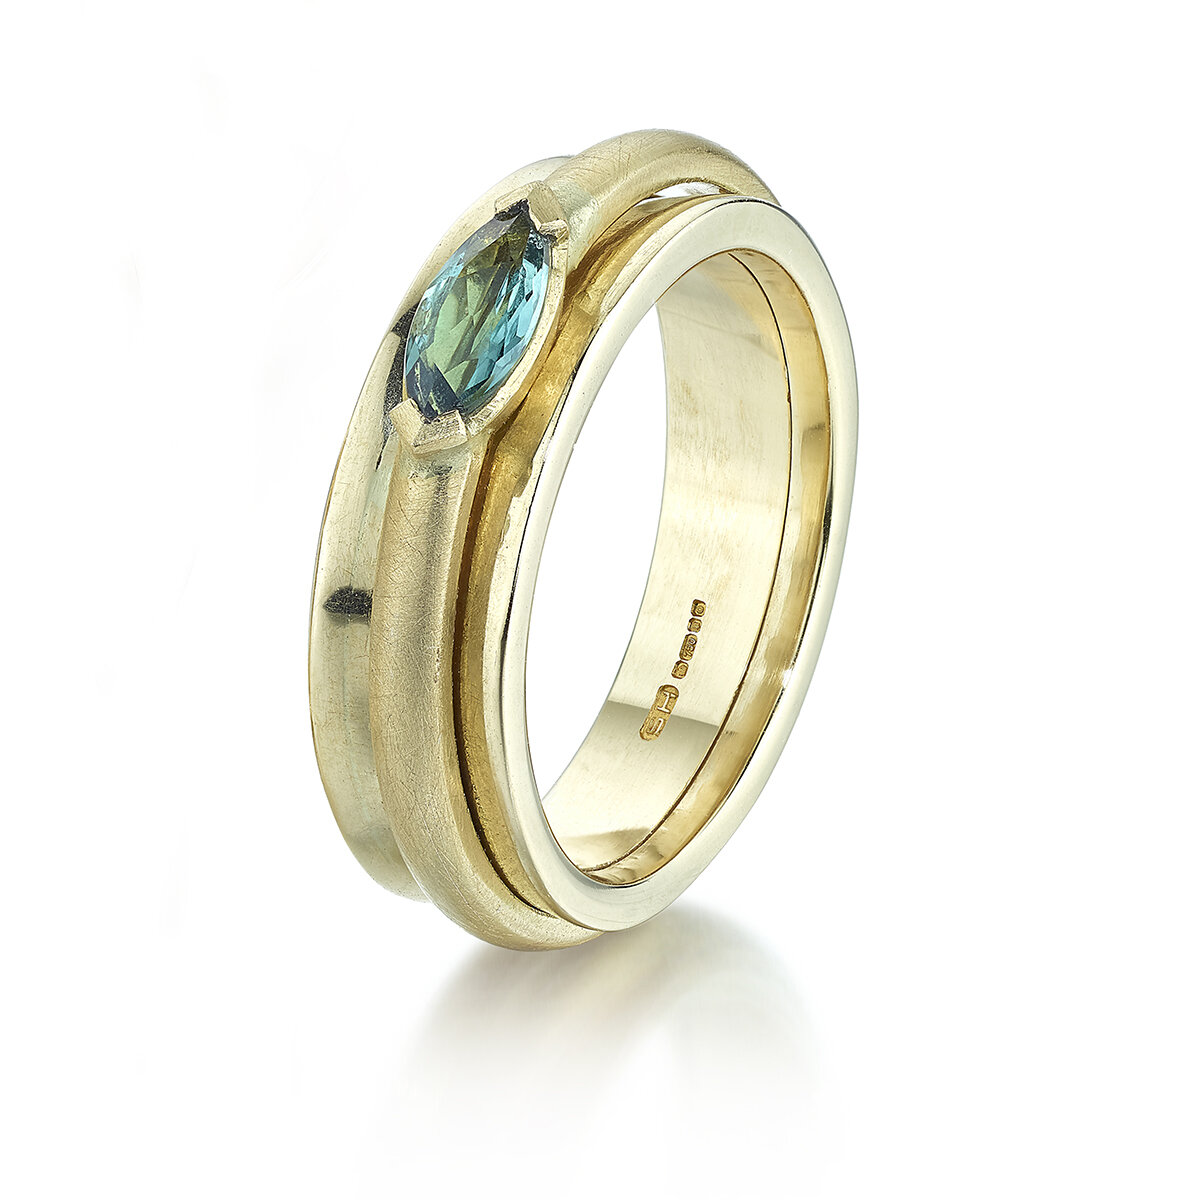 18ct yellow gold opening ring with tourmaline